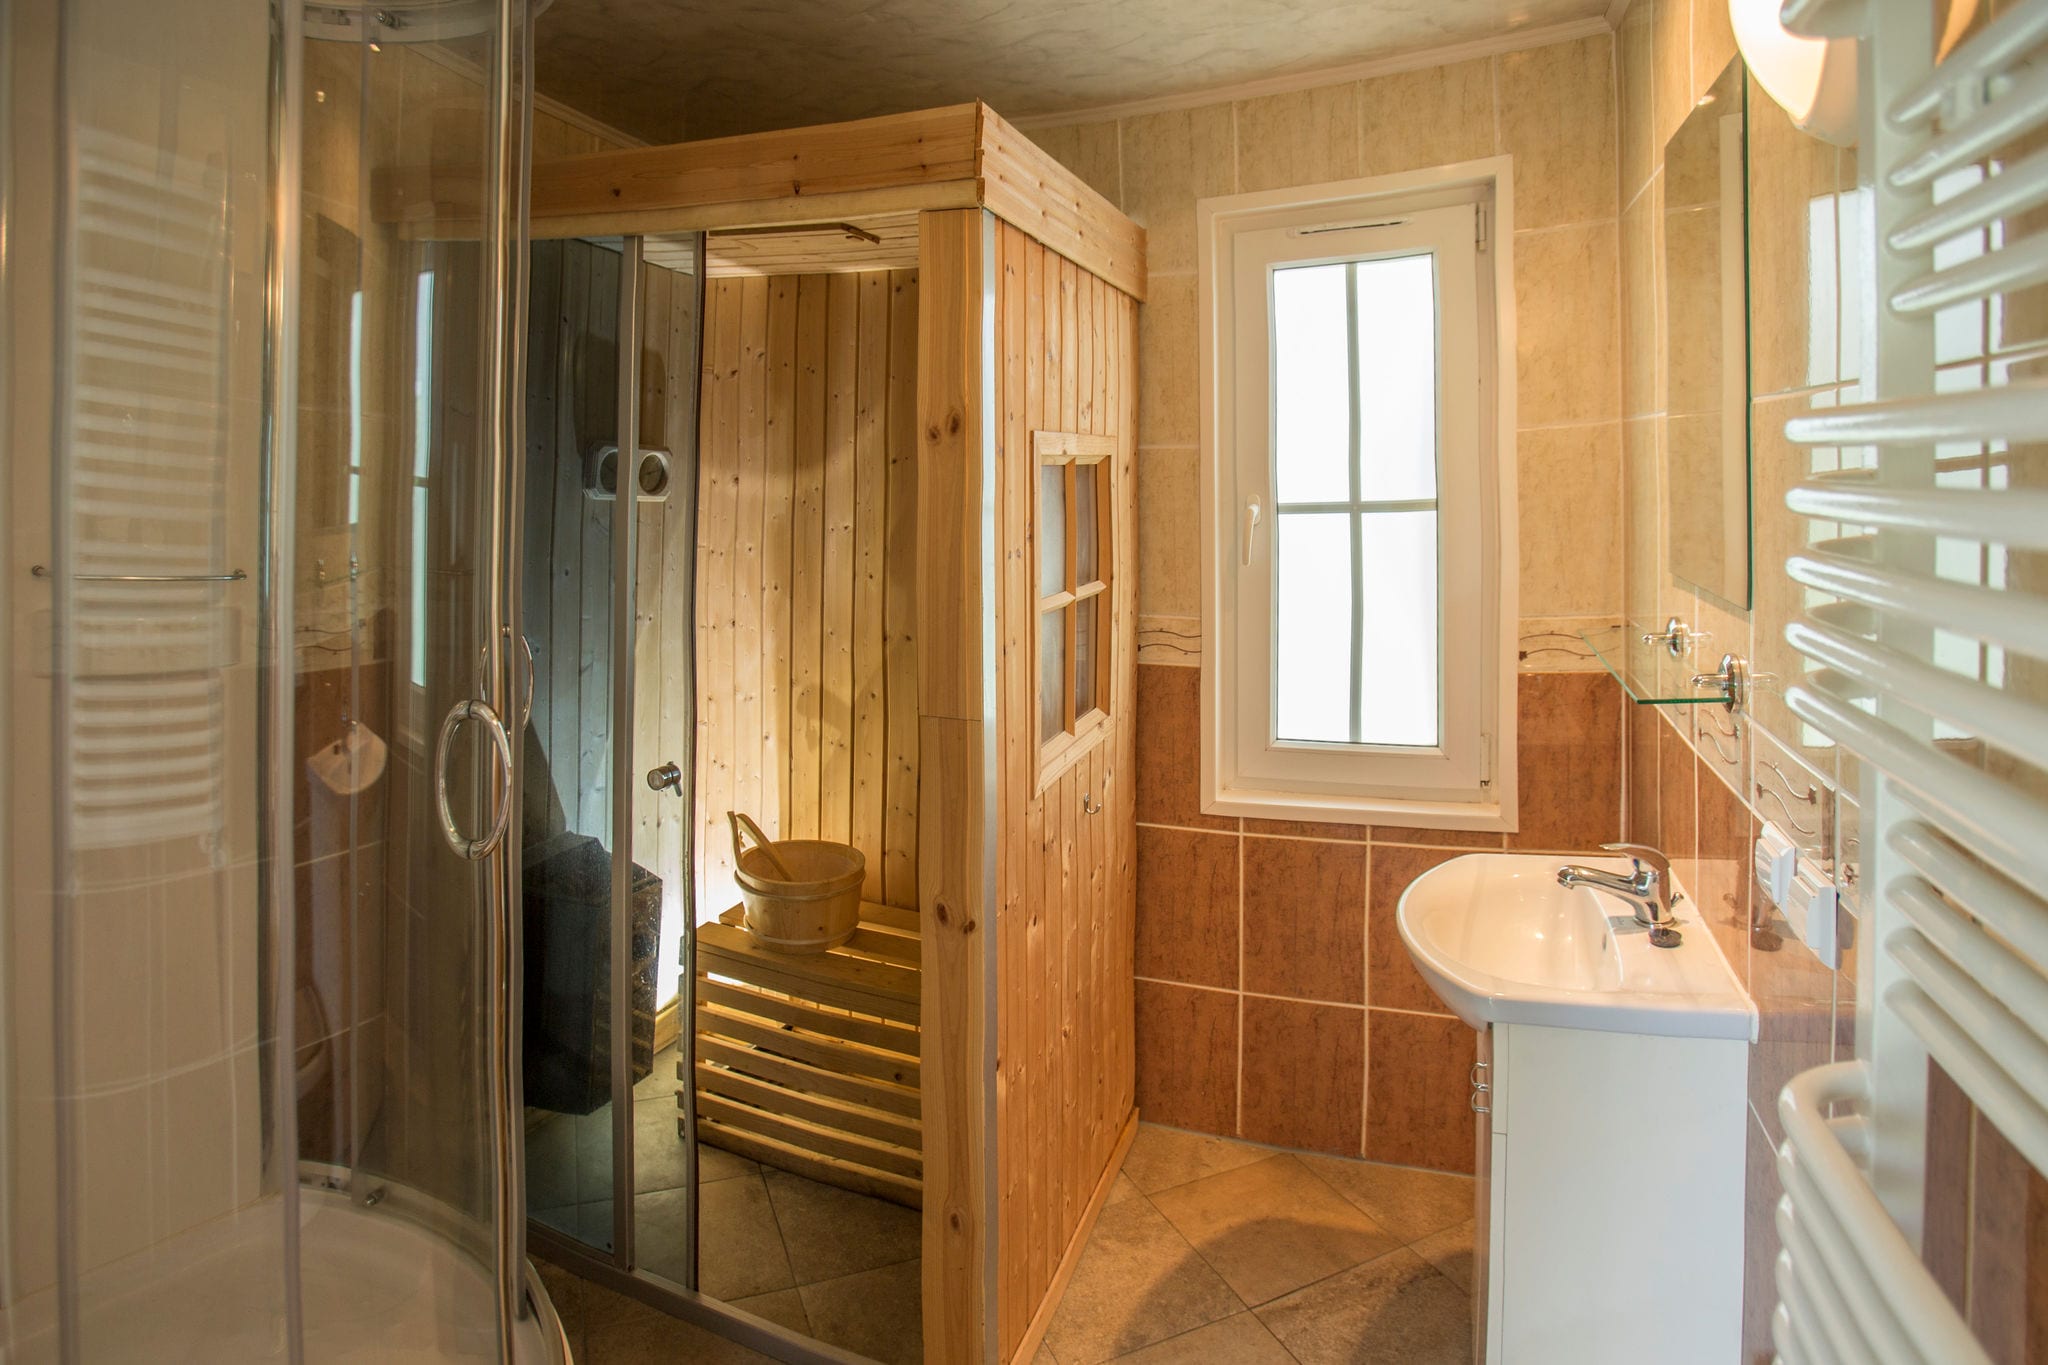 Cozy chalet with air conditioning and steam shower, at a holiday park in Twente